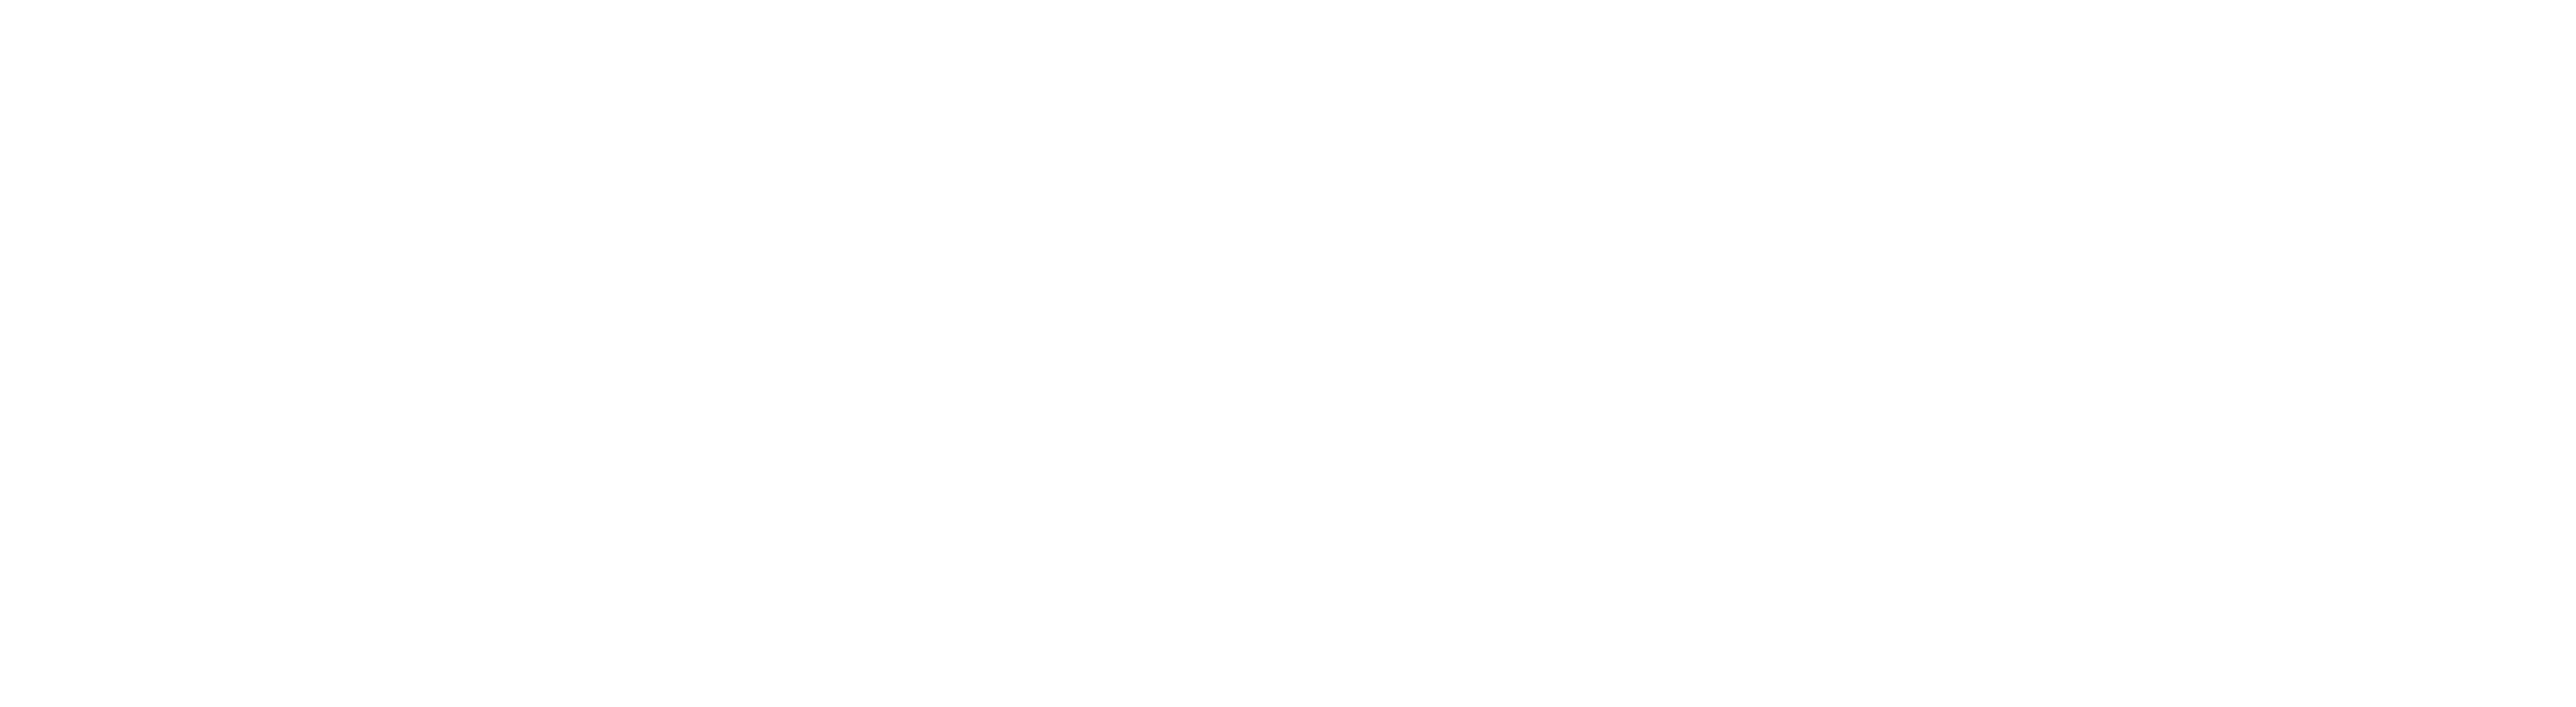 Clinical Skills Education logo in white